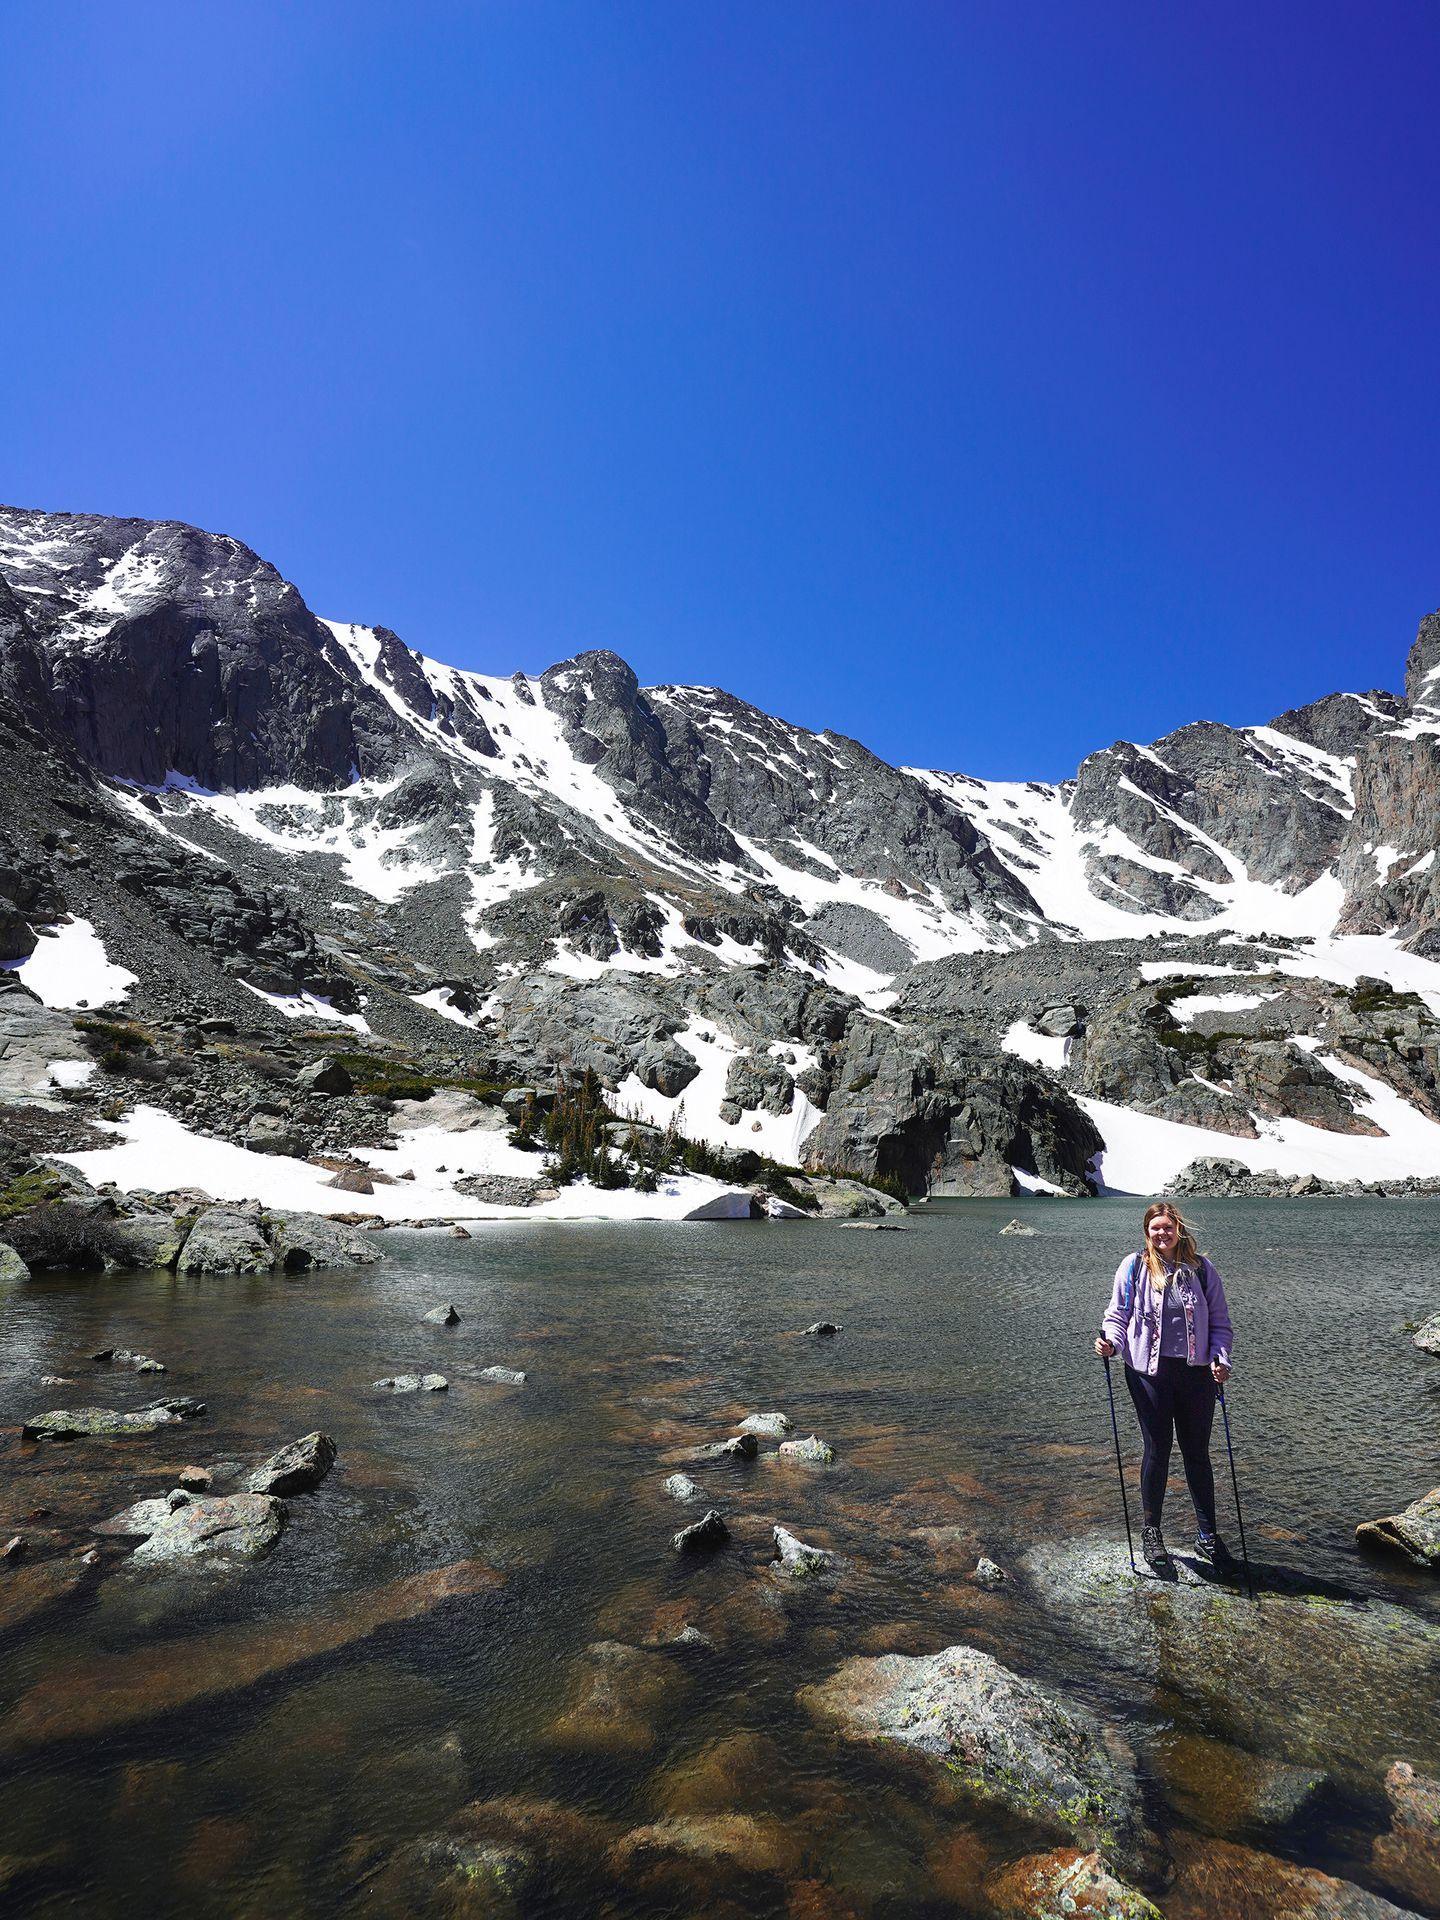 Lydia standing in front of Sky Pond. The mountain in the background is partially covered in snow.